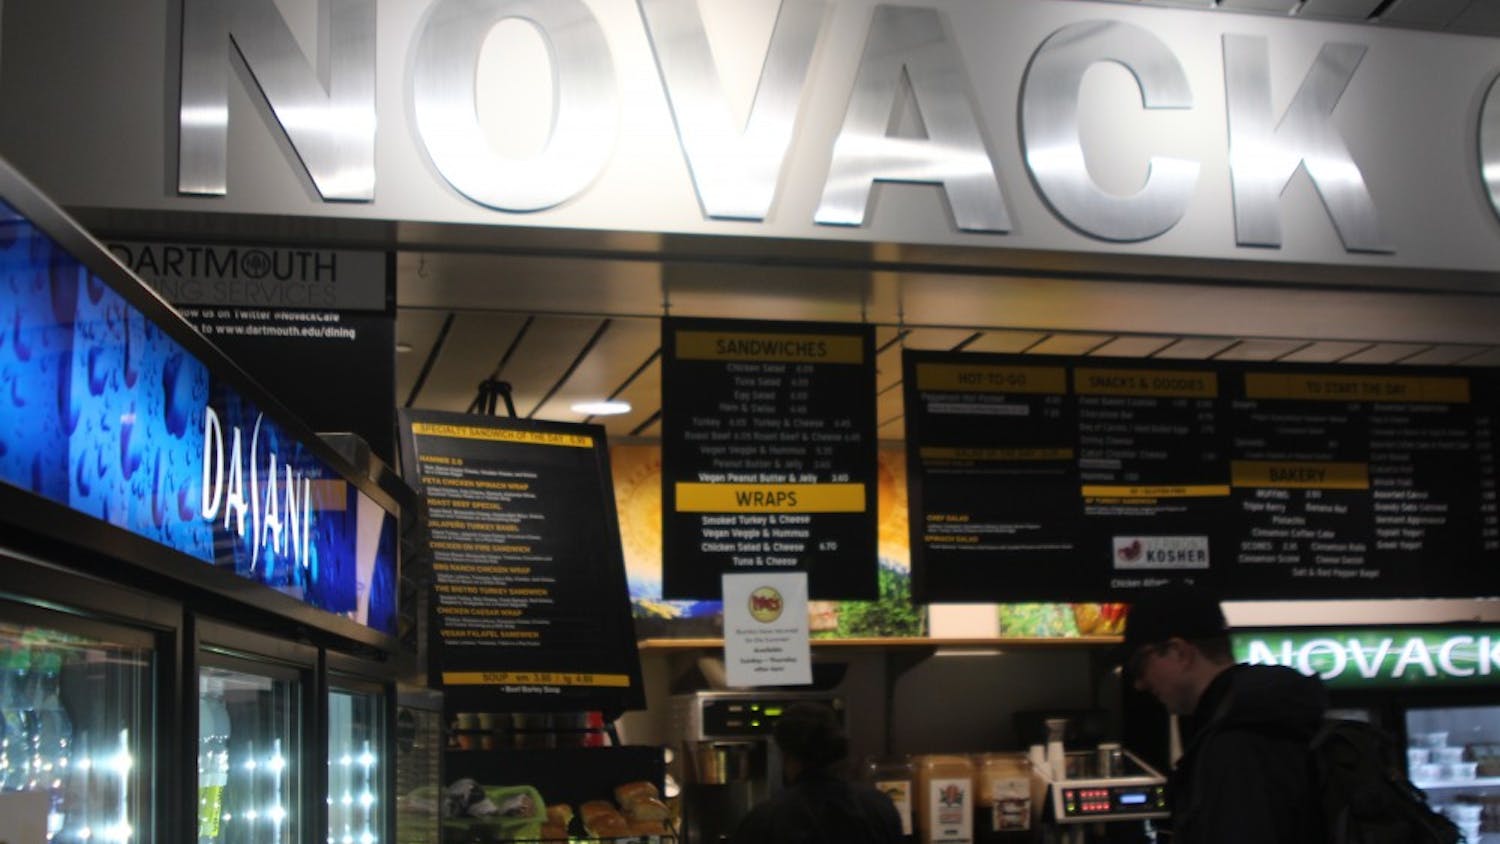 Novack Café, is located in the back of the library and is often open at late hours.&nbsp;